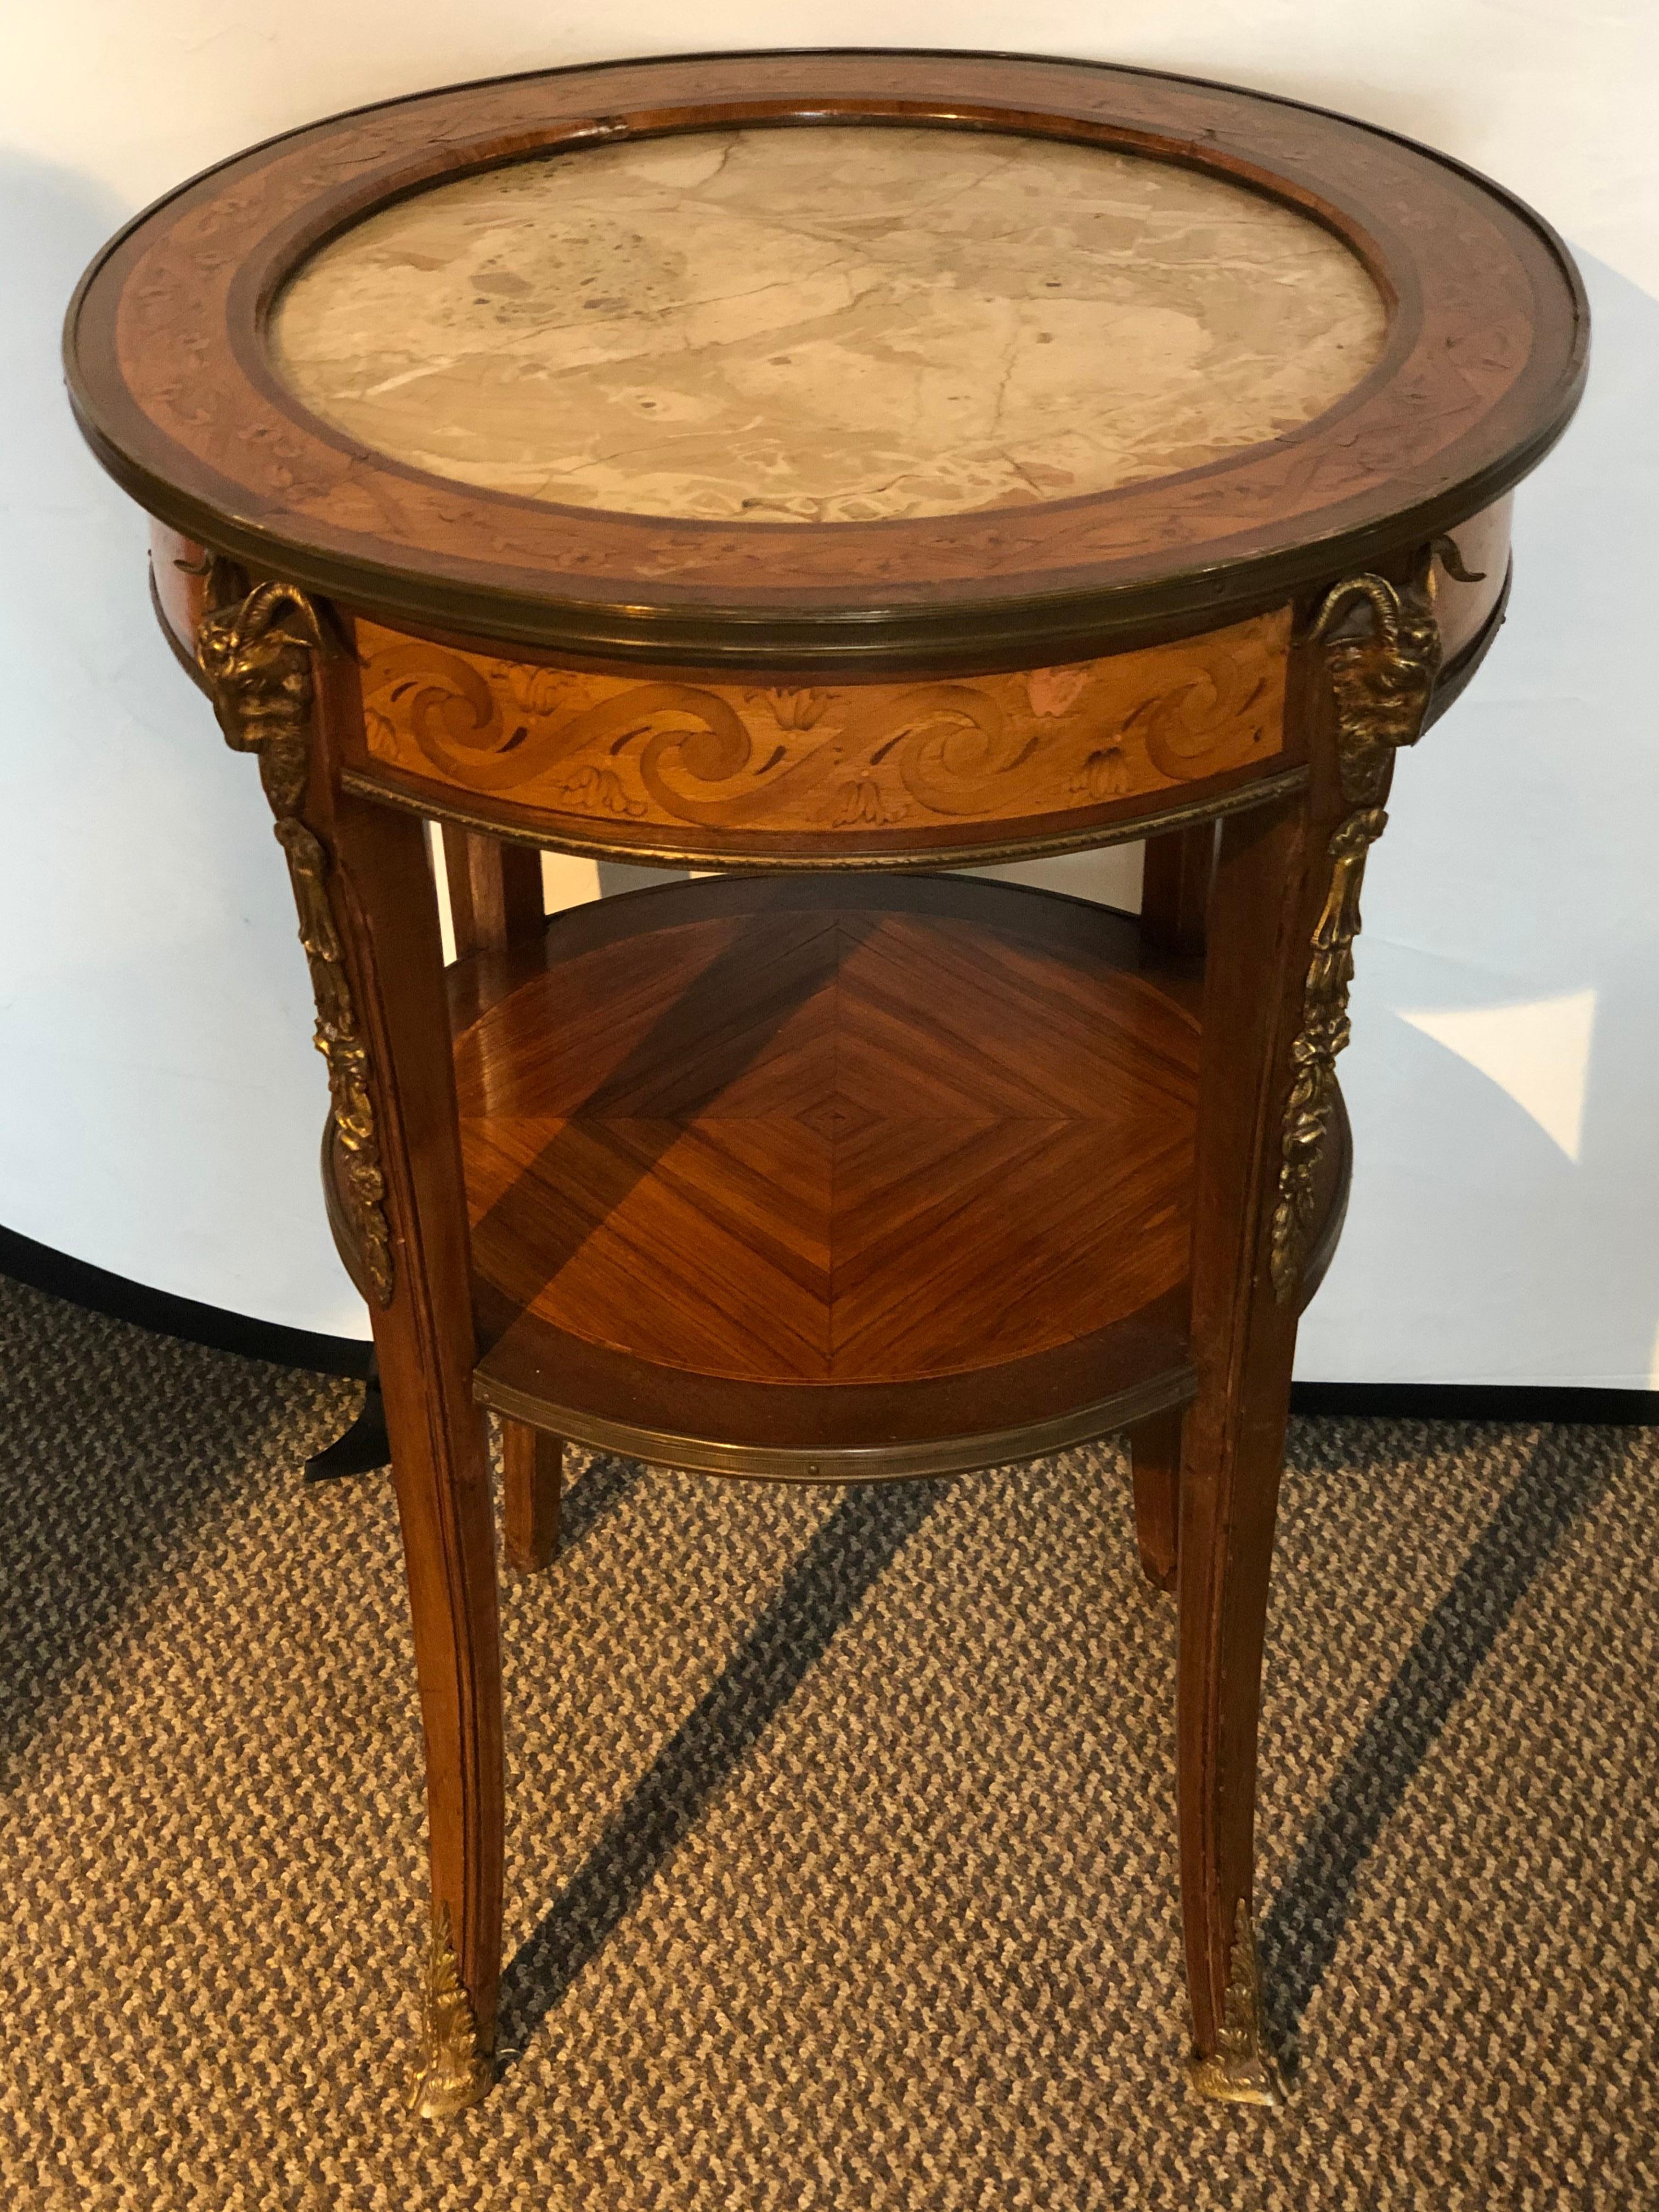 19th-20th century rams head marble top end, lamp or center table. This side table having a finely inlaid satinwood design supporting a marble top and wonderful bronze mounts with four ram heads on the circular corners. Having two full bronze shoes.